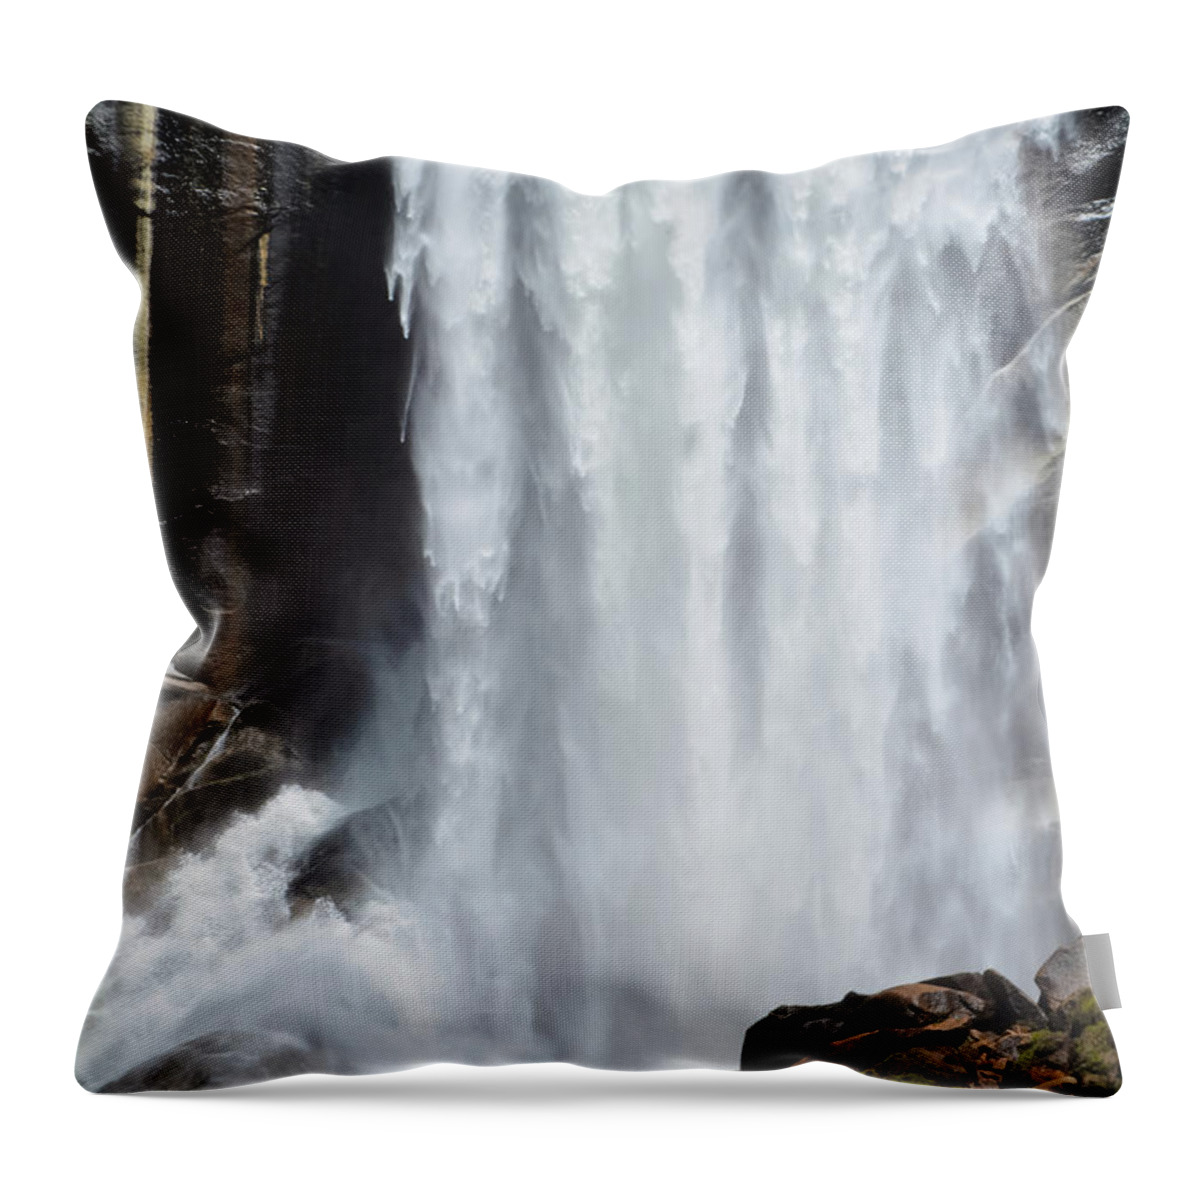 Yosemite National Park Throw Pillow featuring the photograph Vernal Fall Portrait by Kyle Hanson